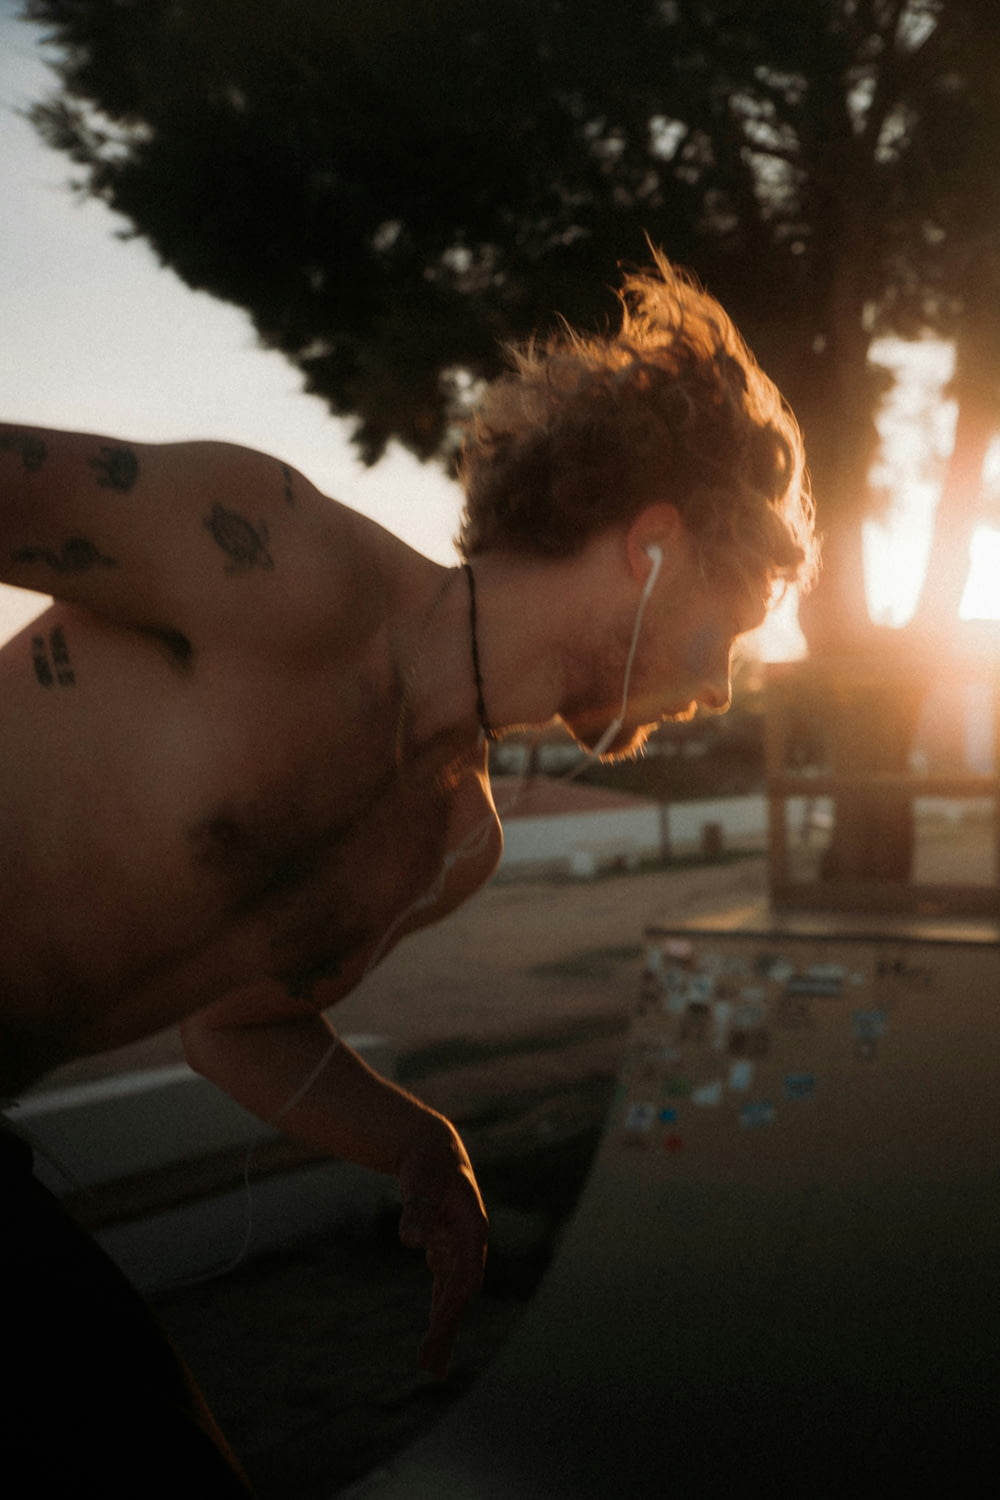 a shirtless man with no shirt on riding a skateboard